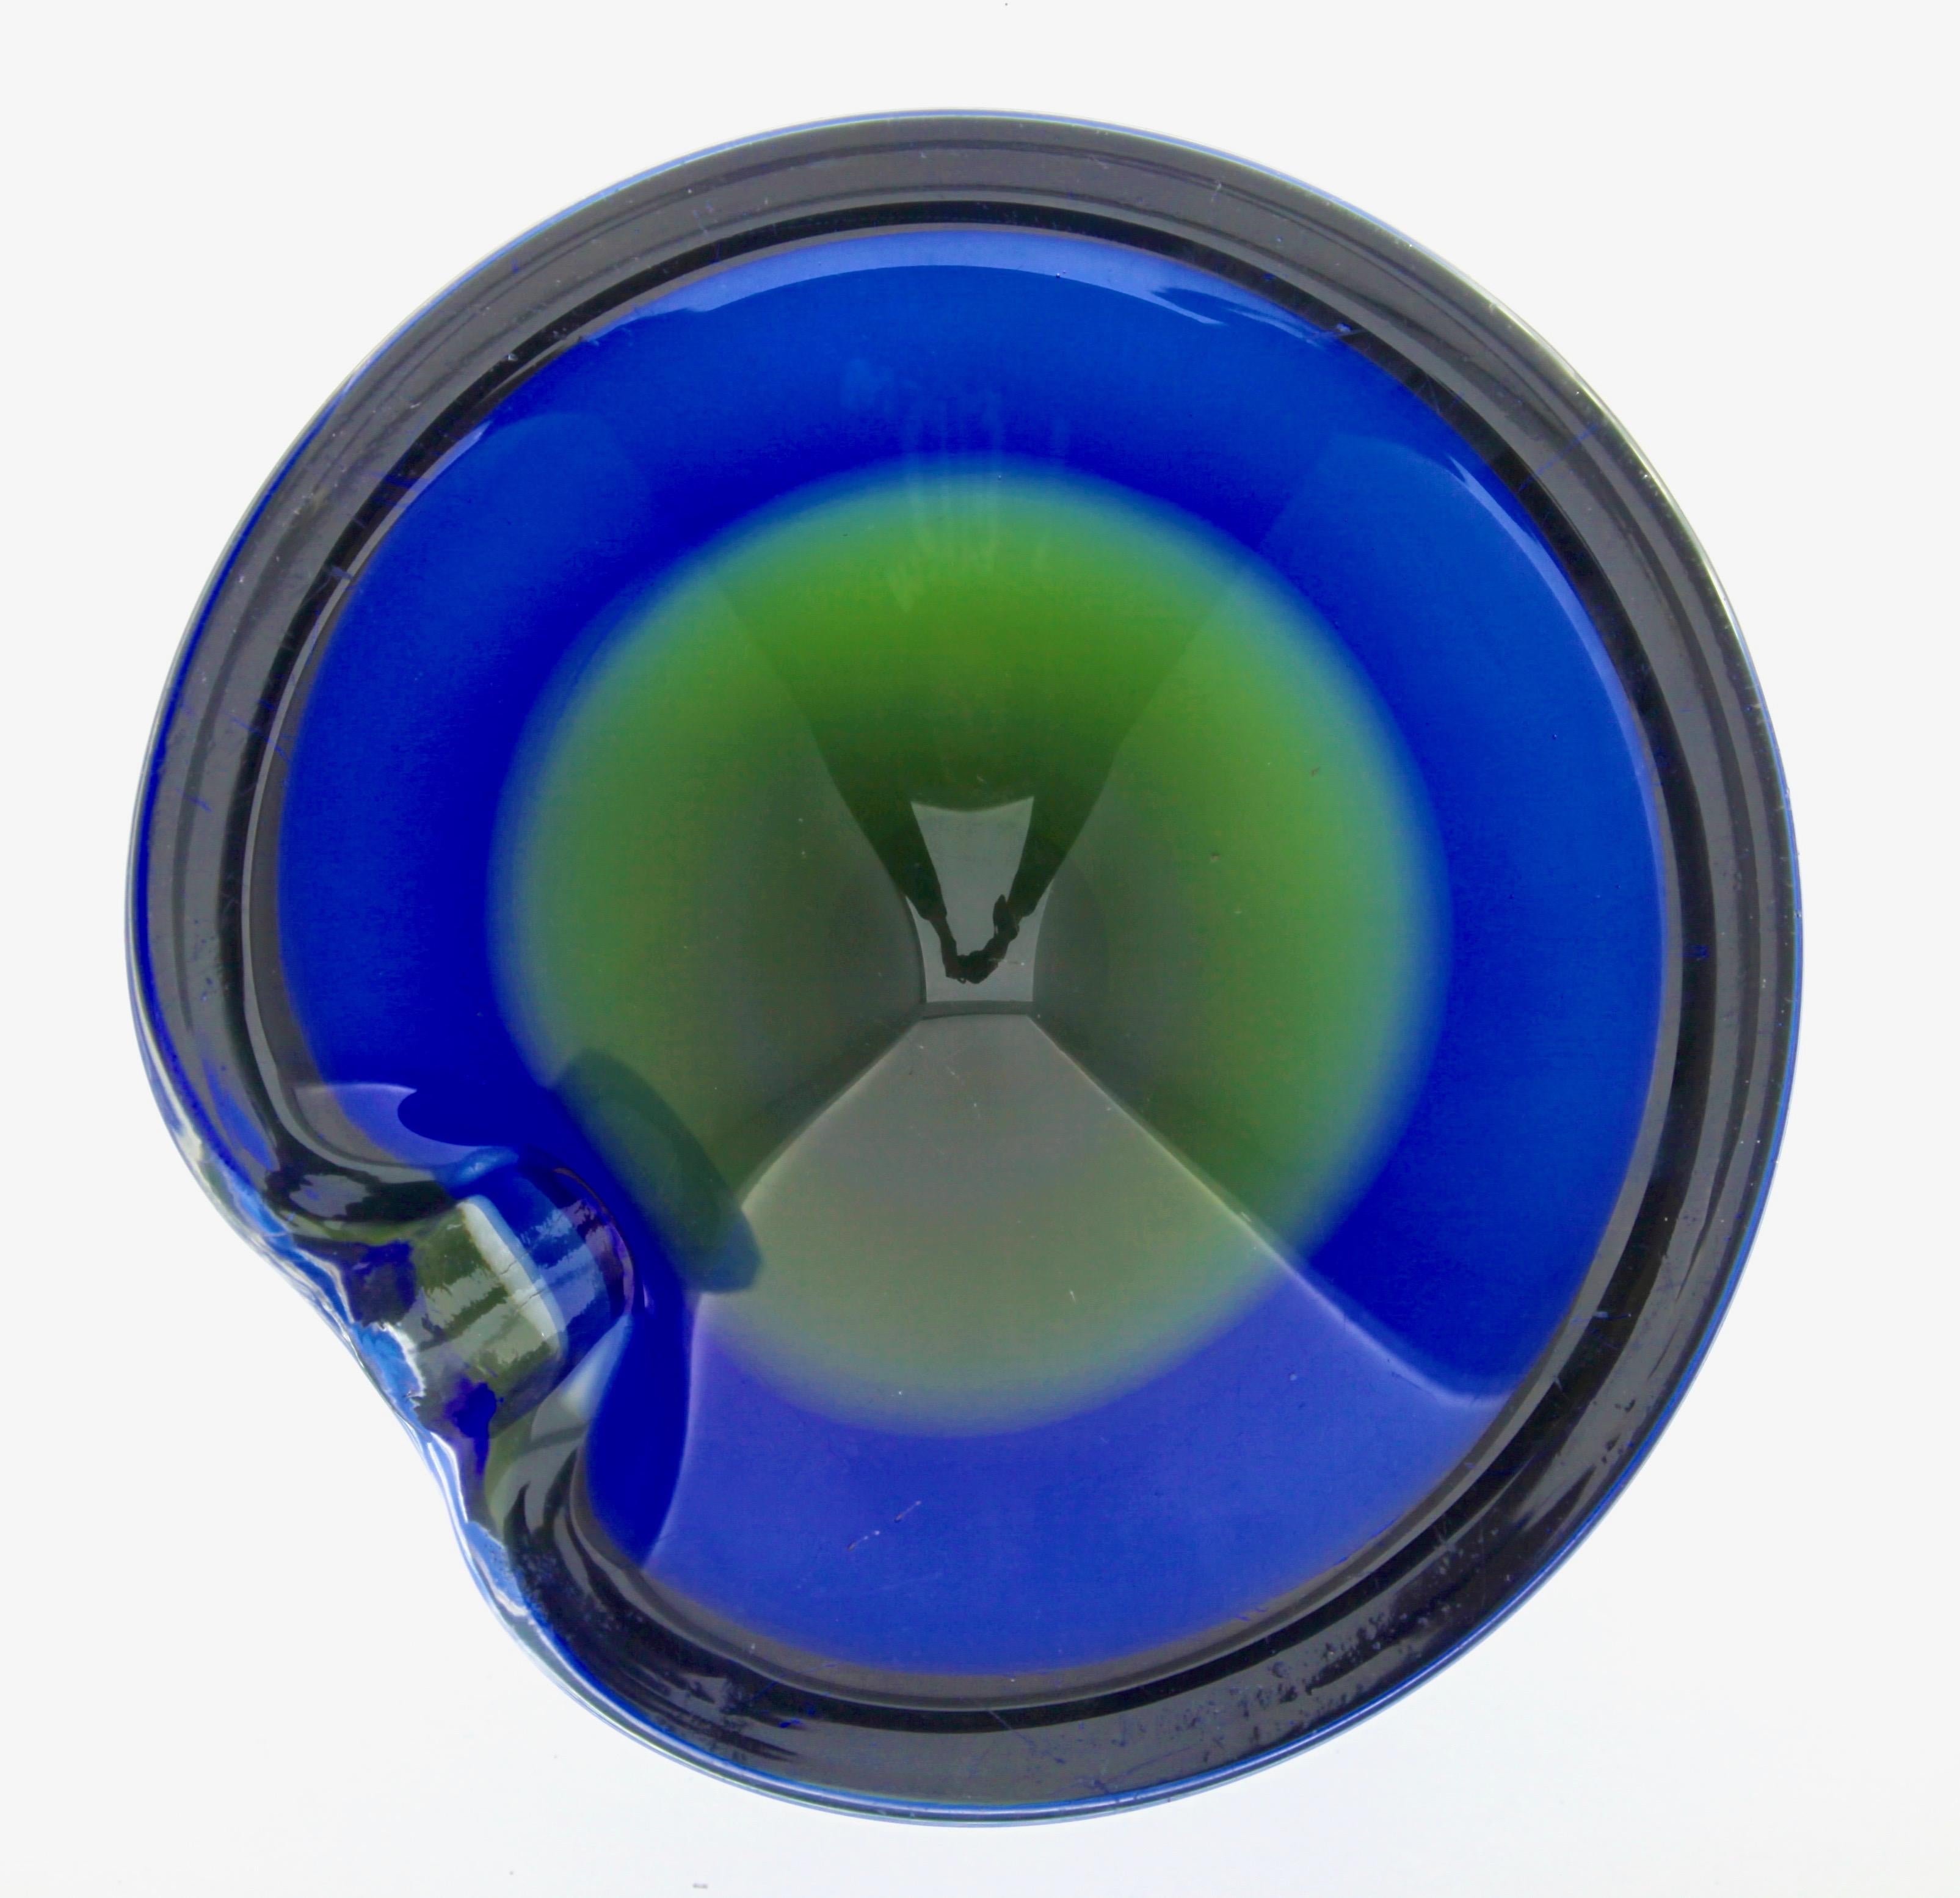 Heavy lipped bowl made of top crystal in the 1970s in the Czech Republic. The dramatic olive green and cobalt blue bowl have been handmade from top quality crystal with a mastery of simple form and high production quality.

The piece is in